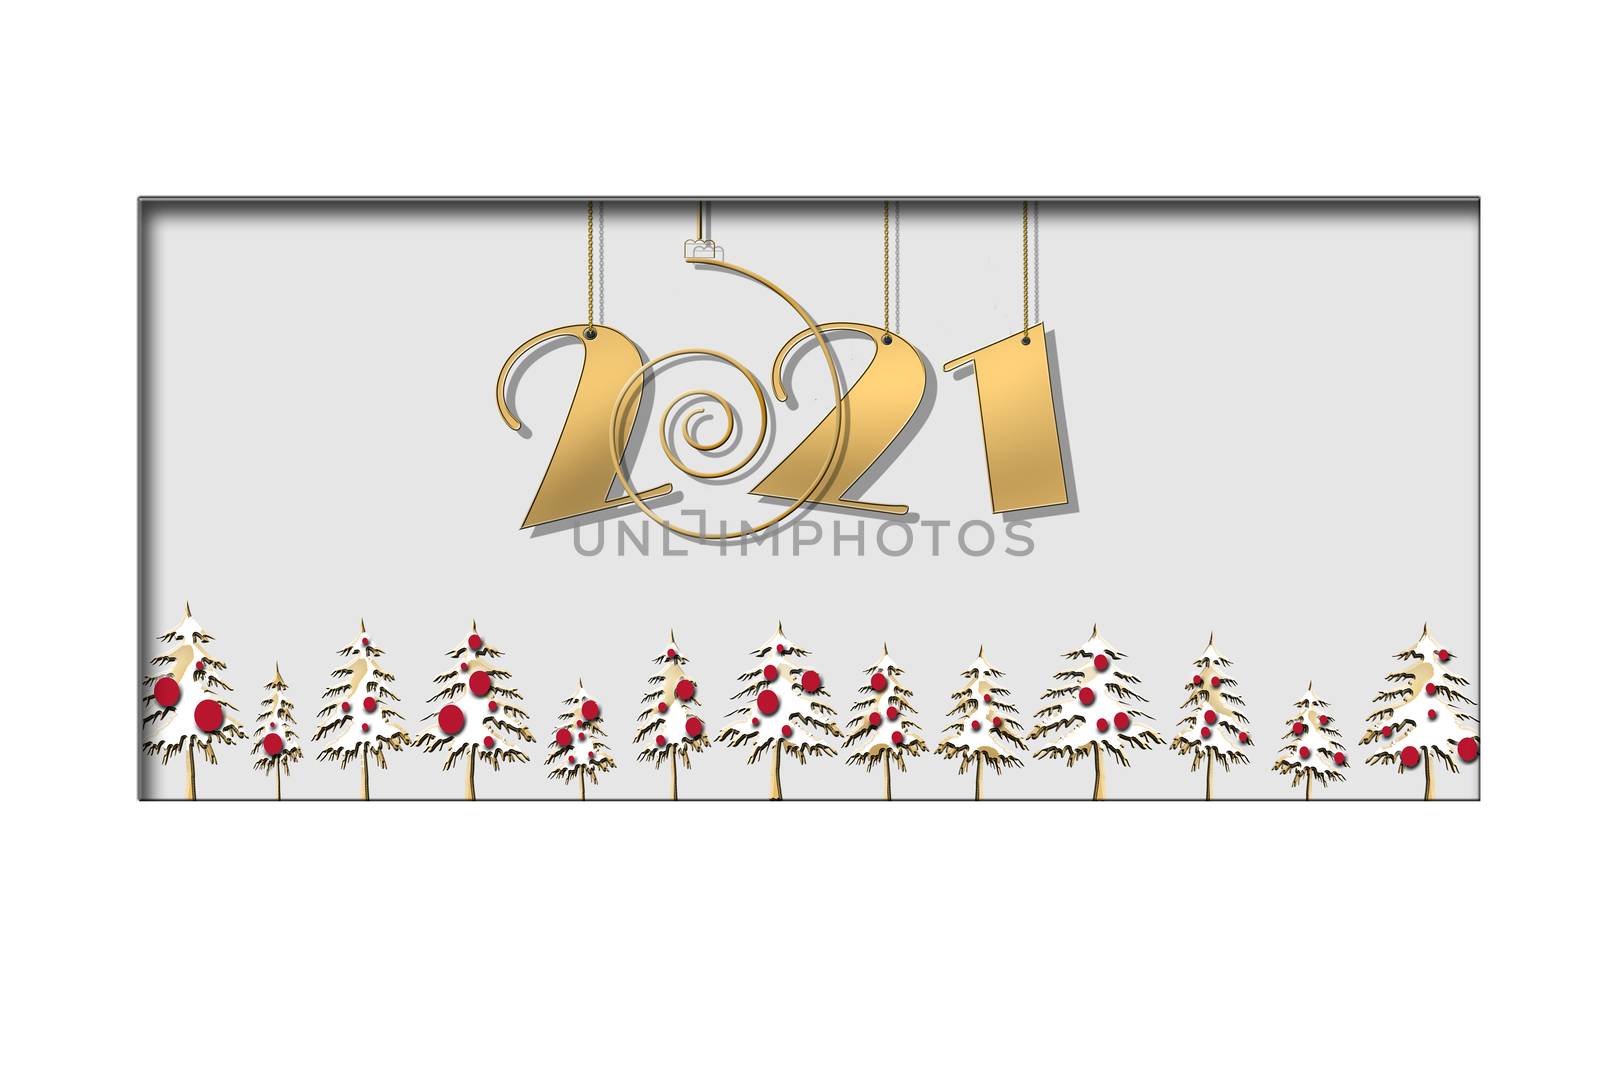 2021 happy New Year card. Hanging gold number 2021 with border of Christmas trees. Horizontal business card. 3D illustration